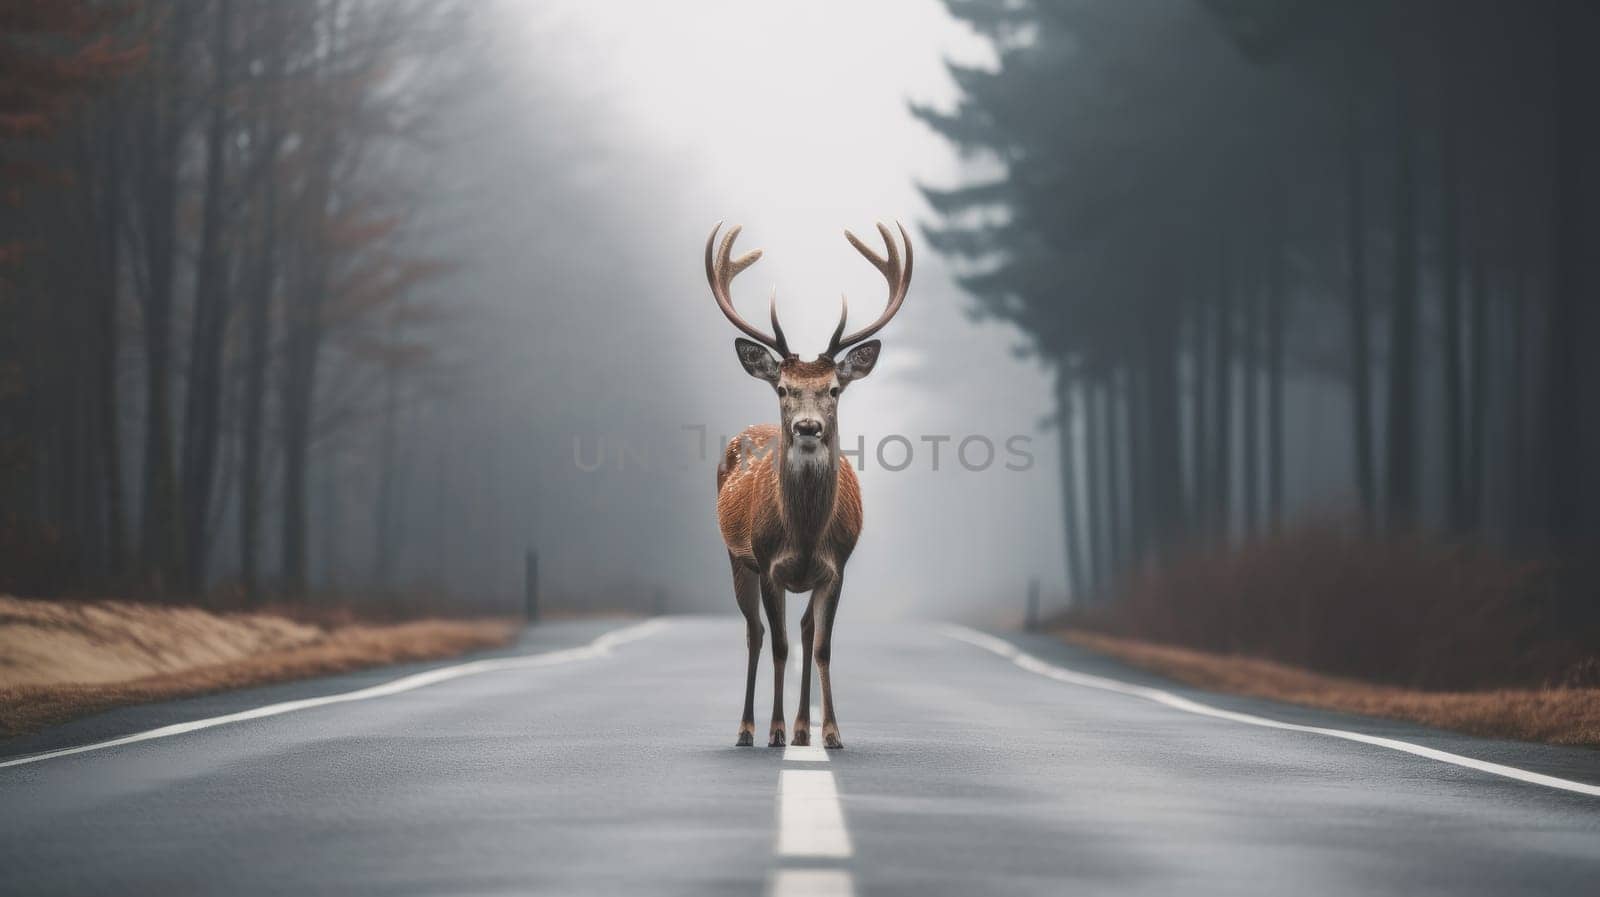 Wildlife Caution. Deer Crossing on Misty Forest Road, Transport Hazard Alert, Road Safety Awareness in Foggy Morning Setting.